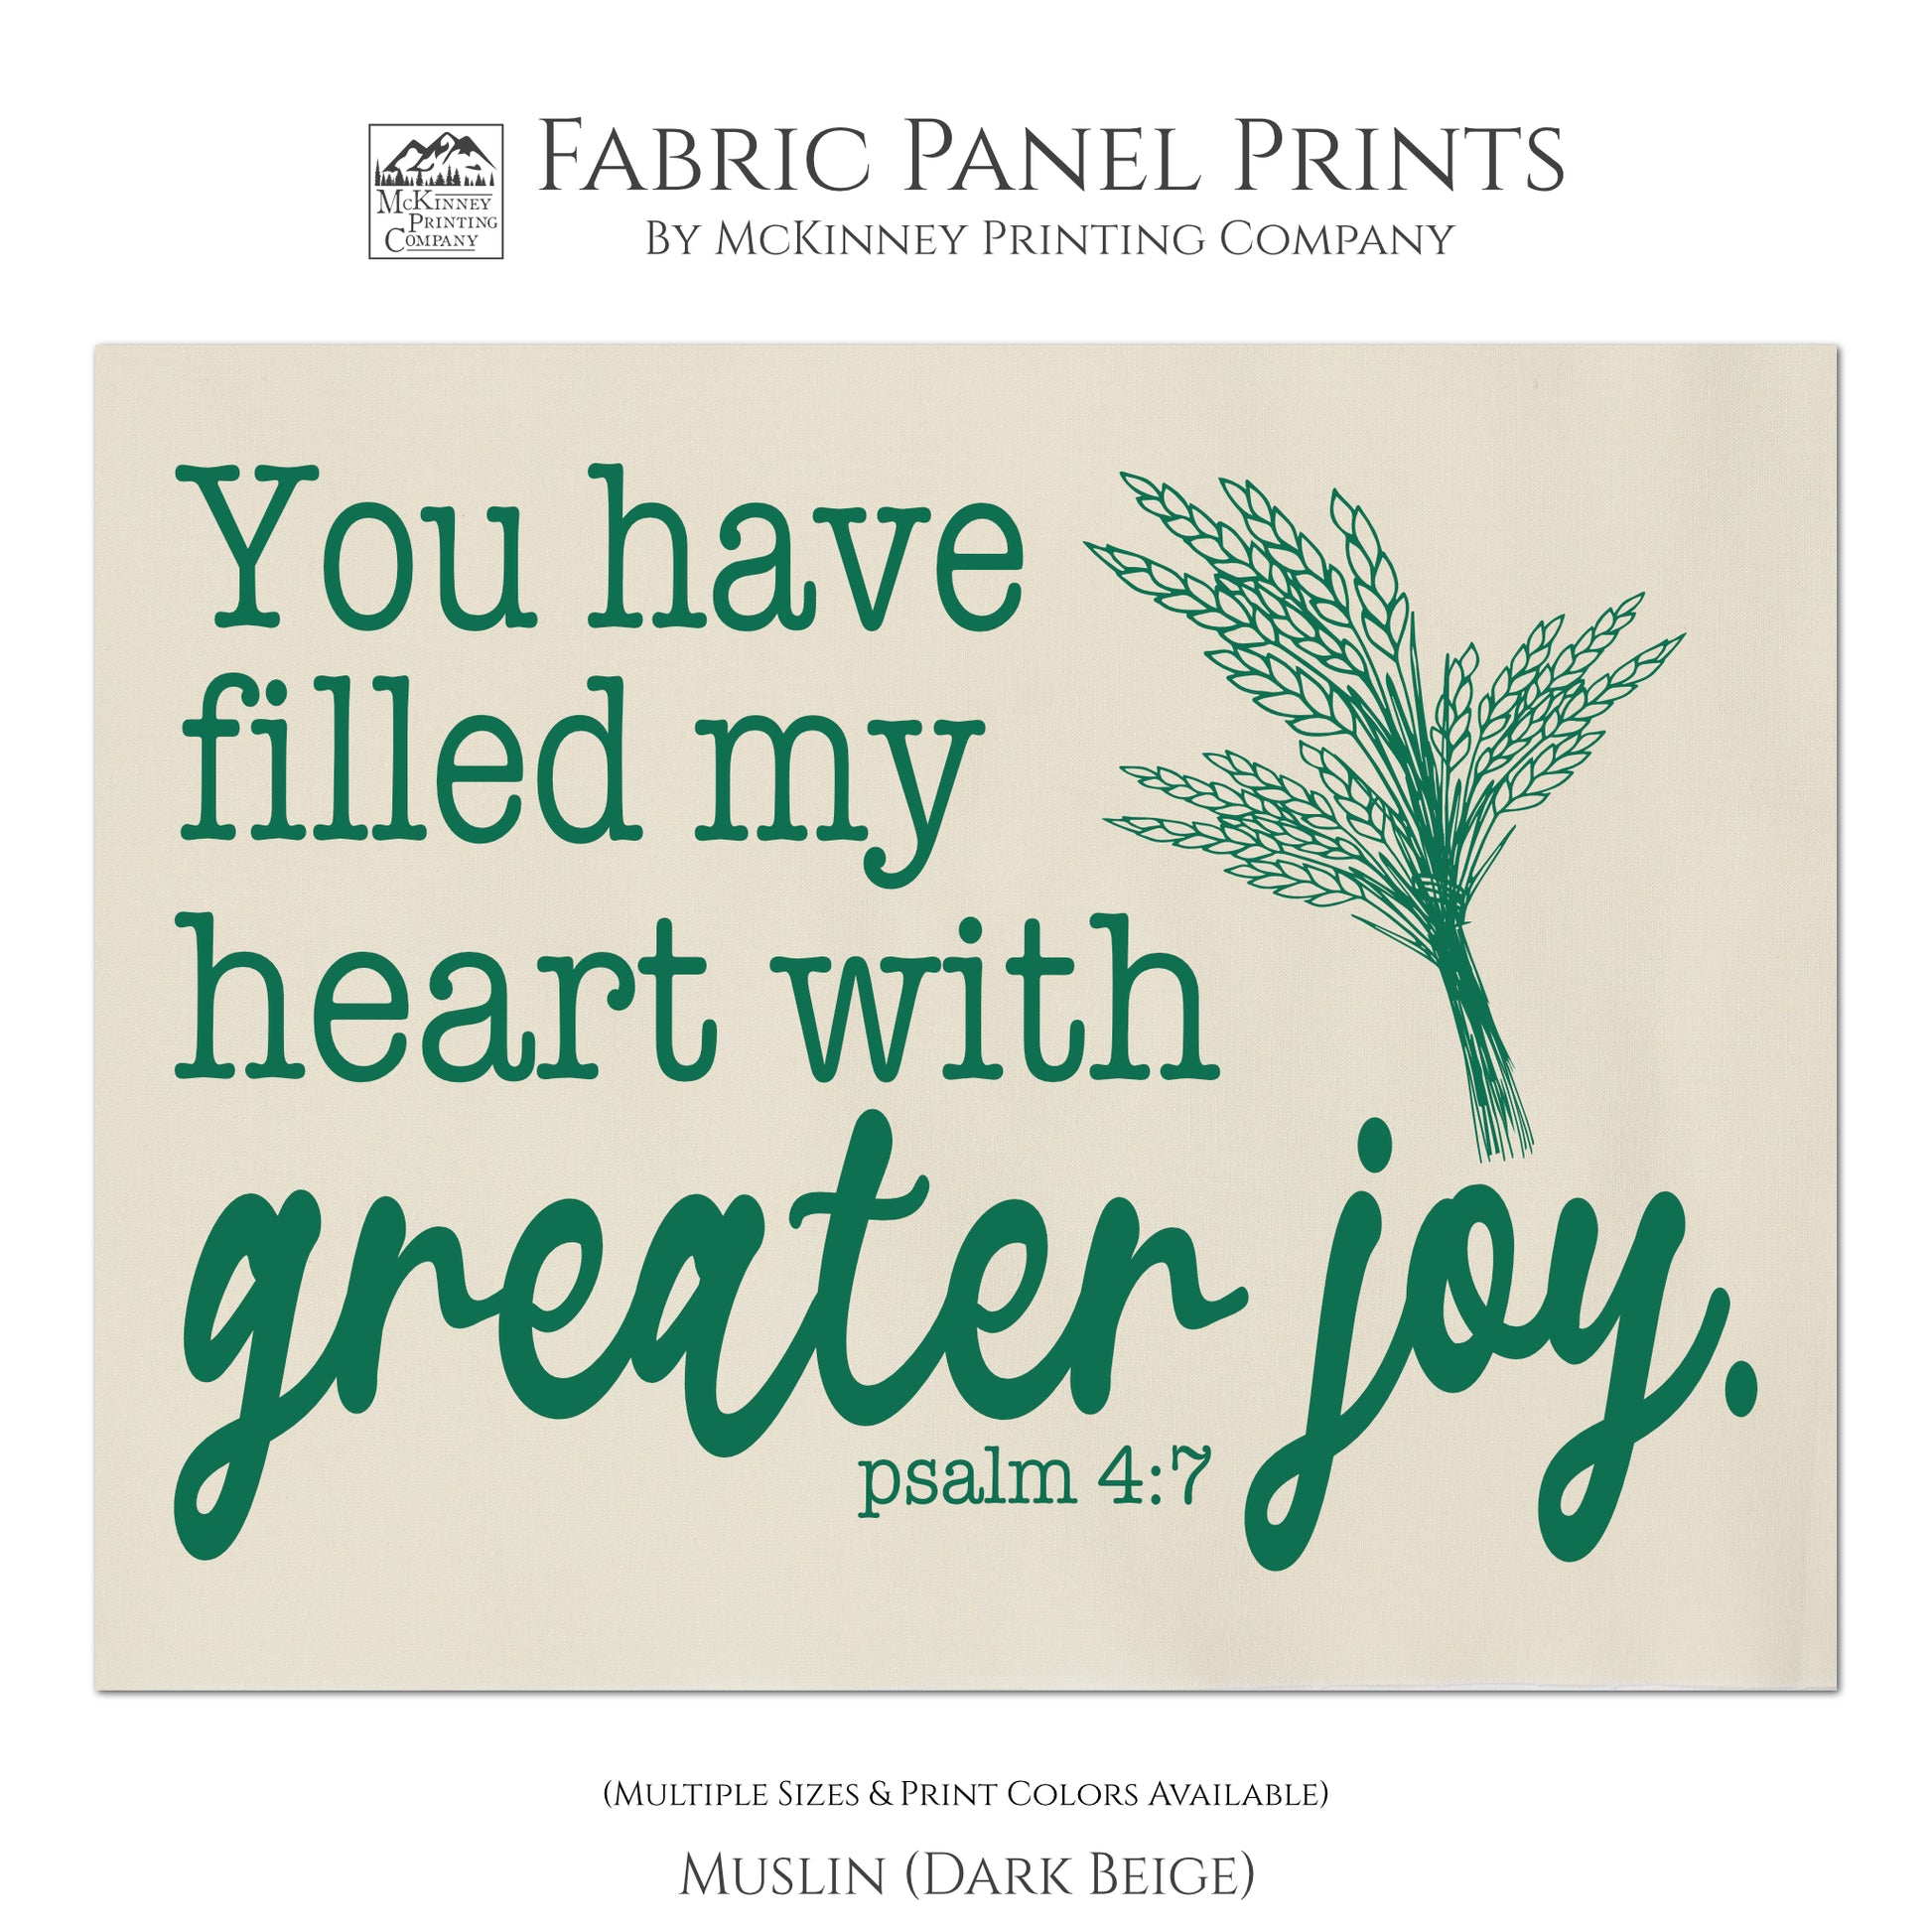 You have filled my heart with greater joy - Psalm 4 7, Scripture Fabric, Religious Fabric, Quilt Block, Wall Hanging, Fabric Panel Print, Muslin